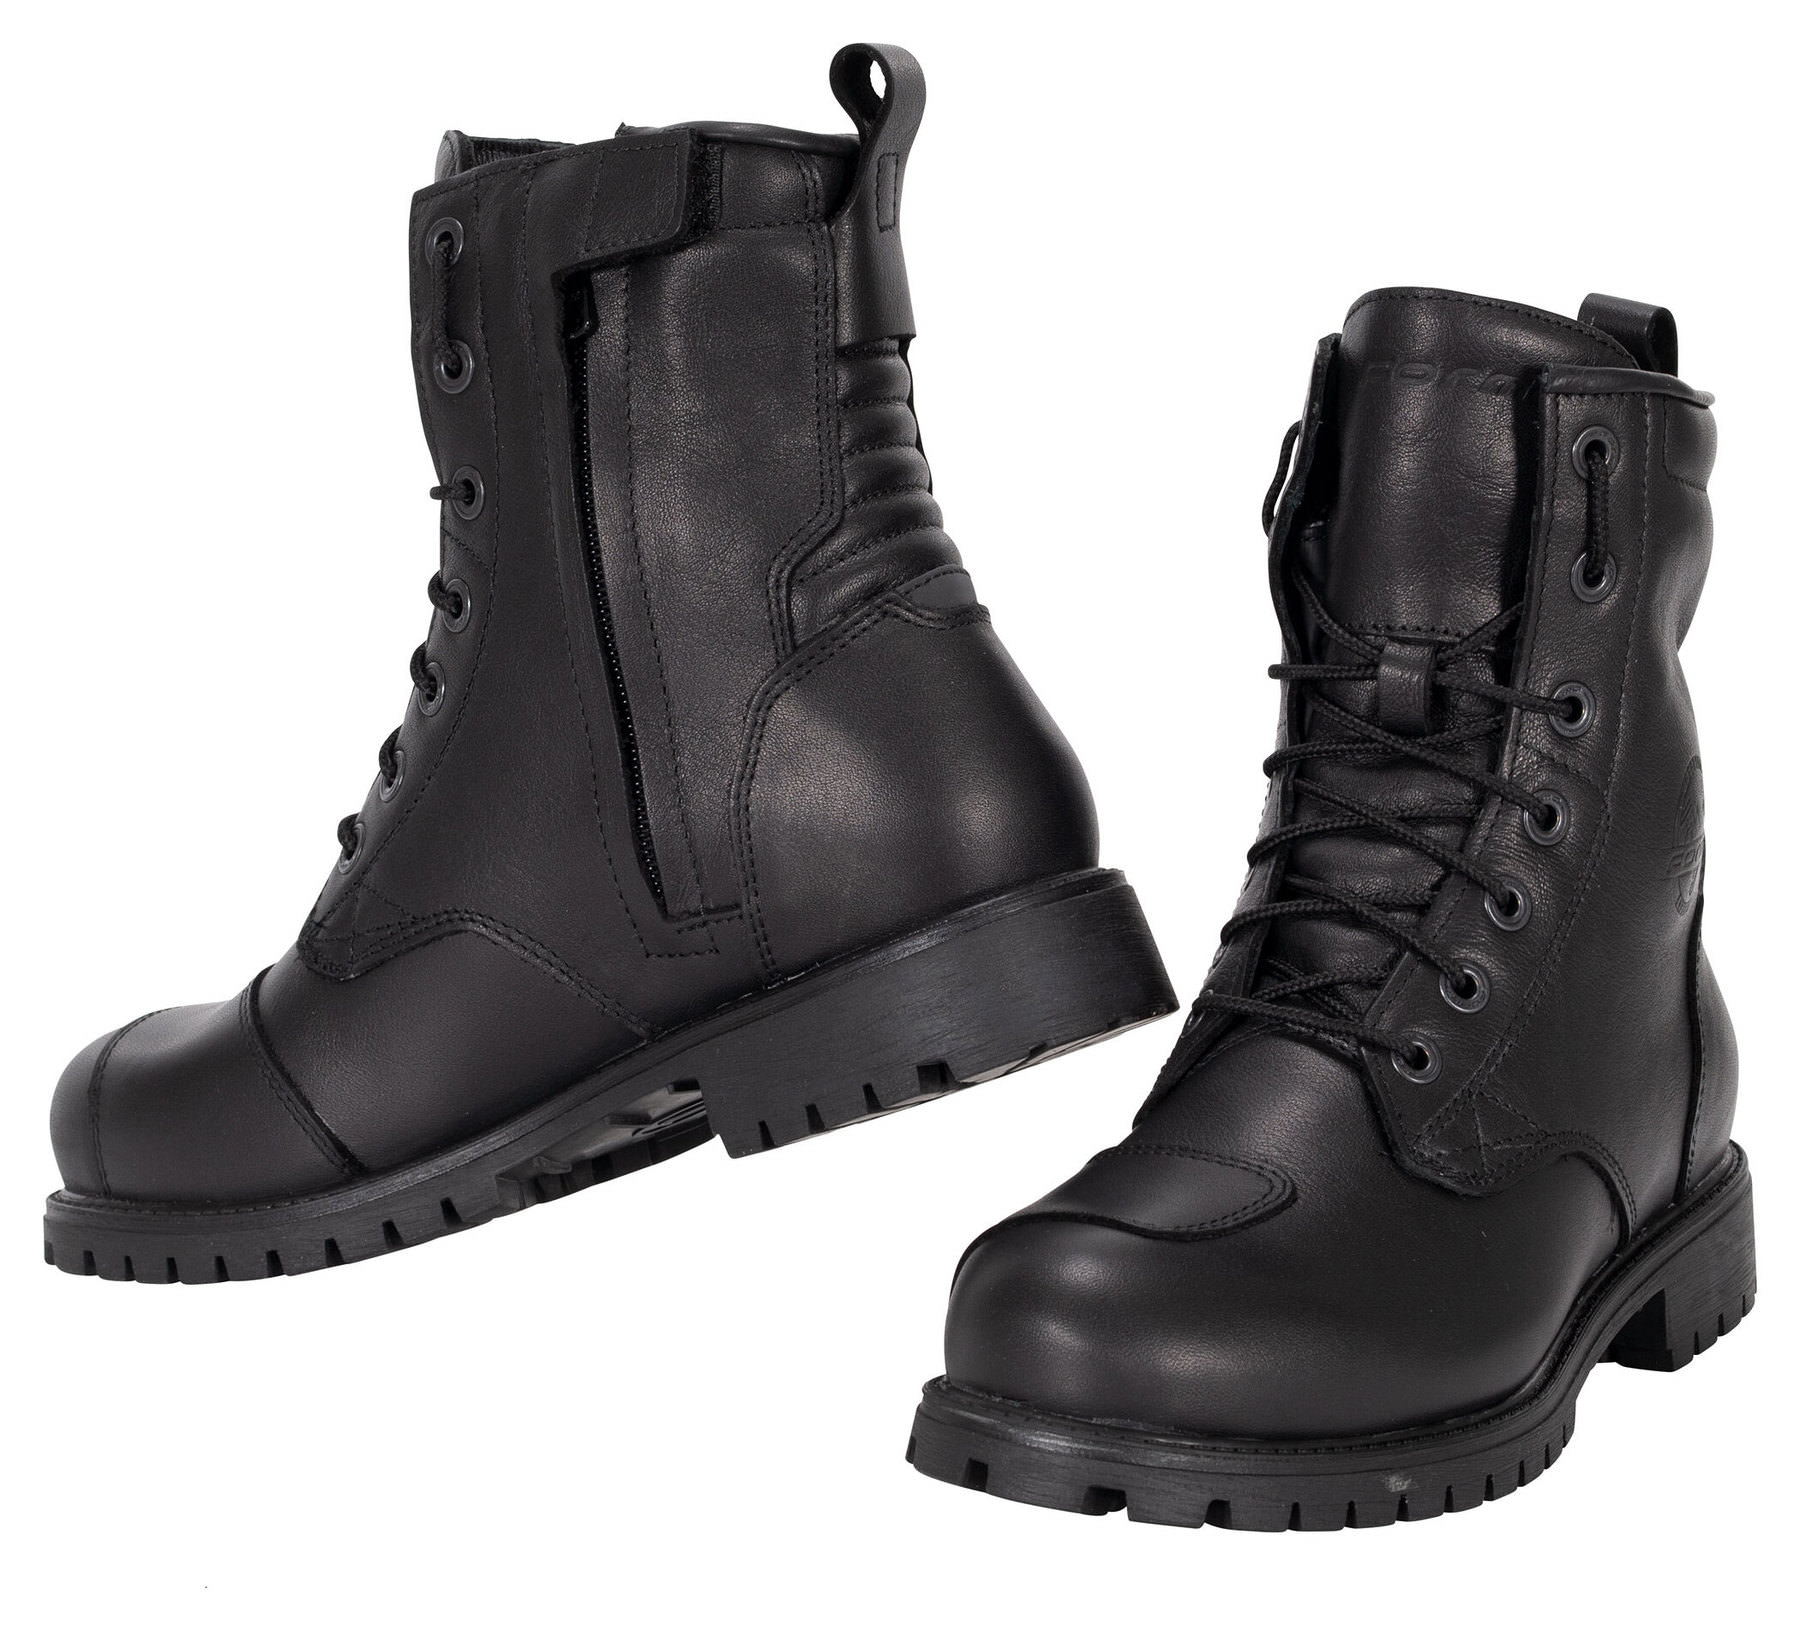 Buy Forma Legacy Boot | Louis motorcycle clothing and technology